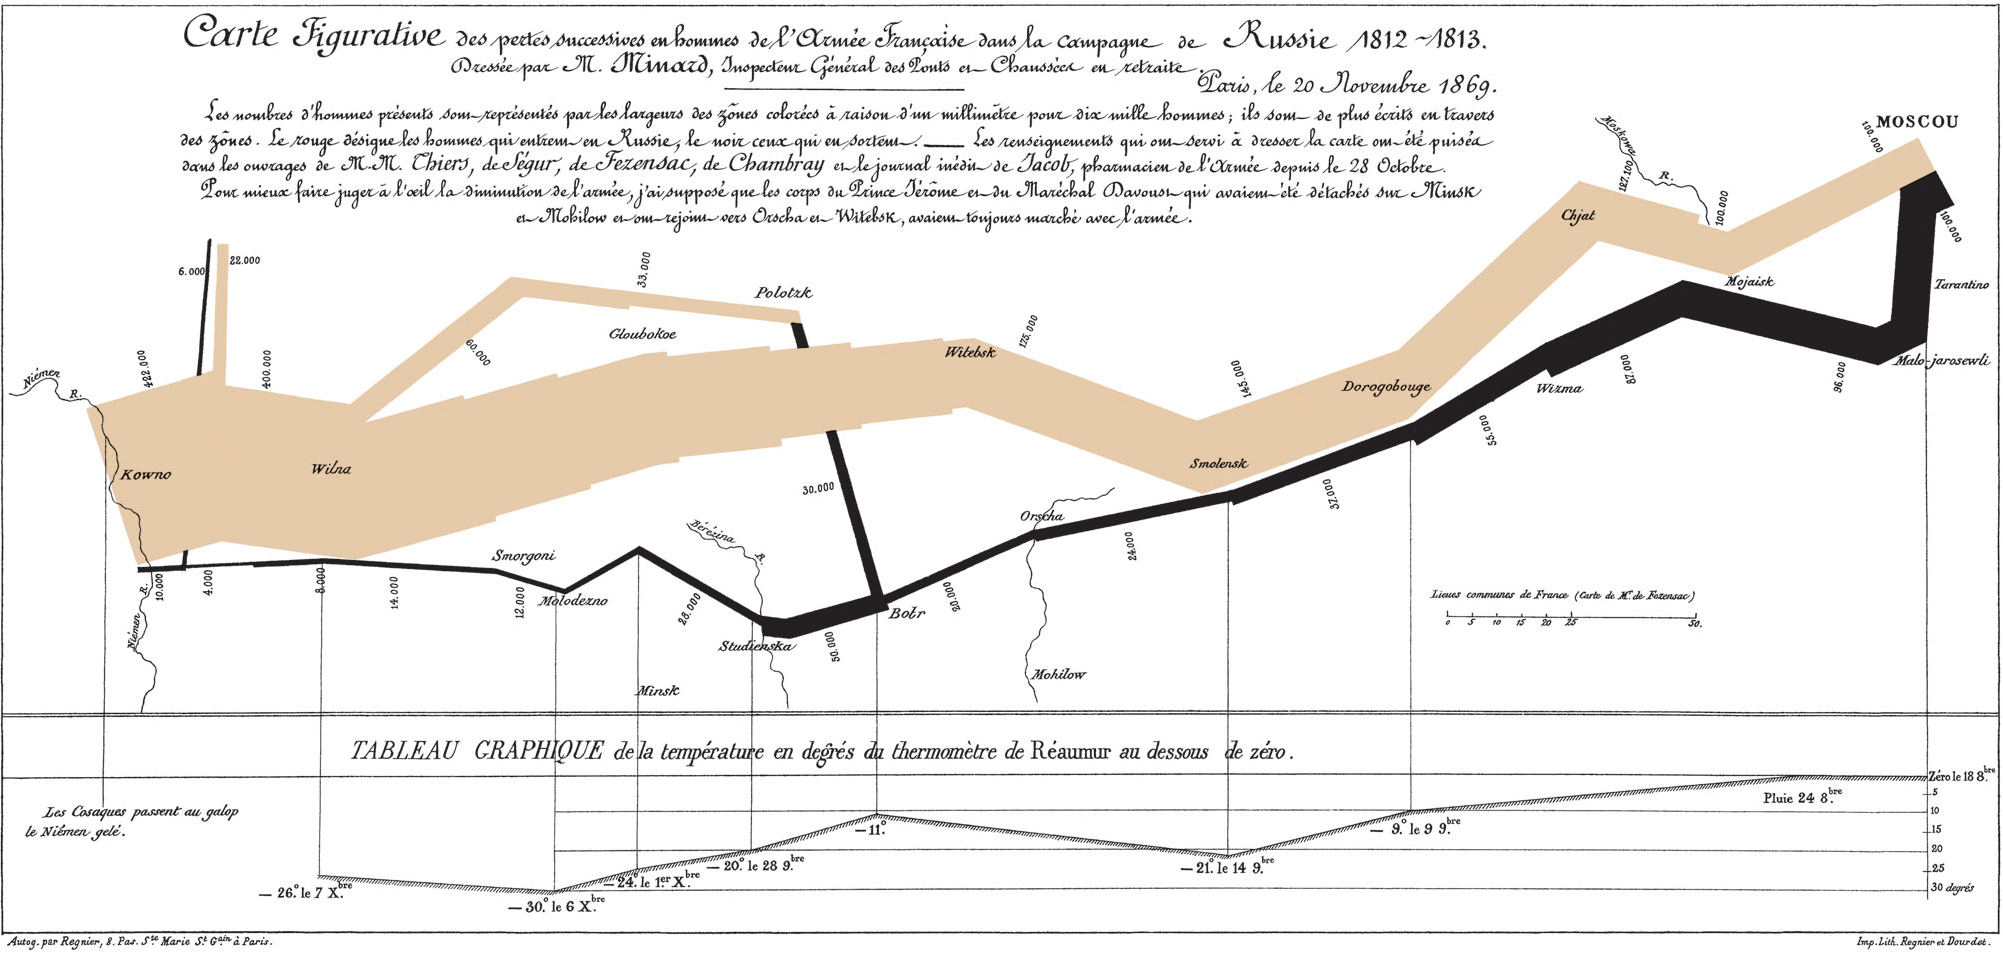 Charles Minard's Time-Series Alluvial Choropleth Map of the French Invasion of and Retreat From Russia